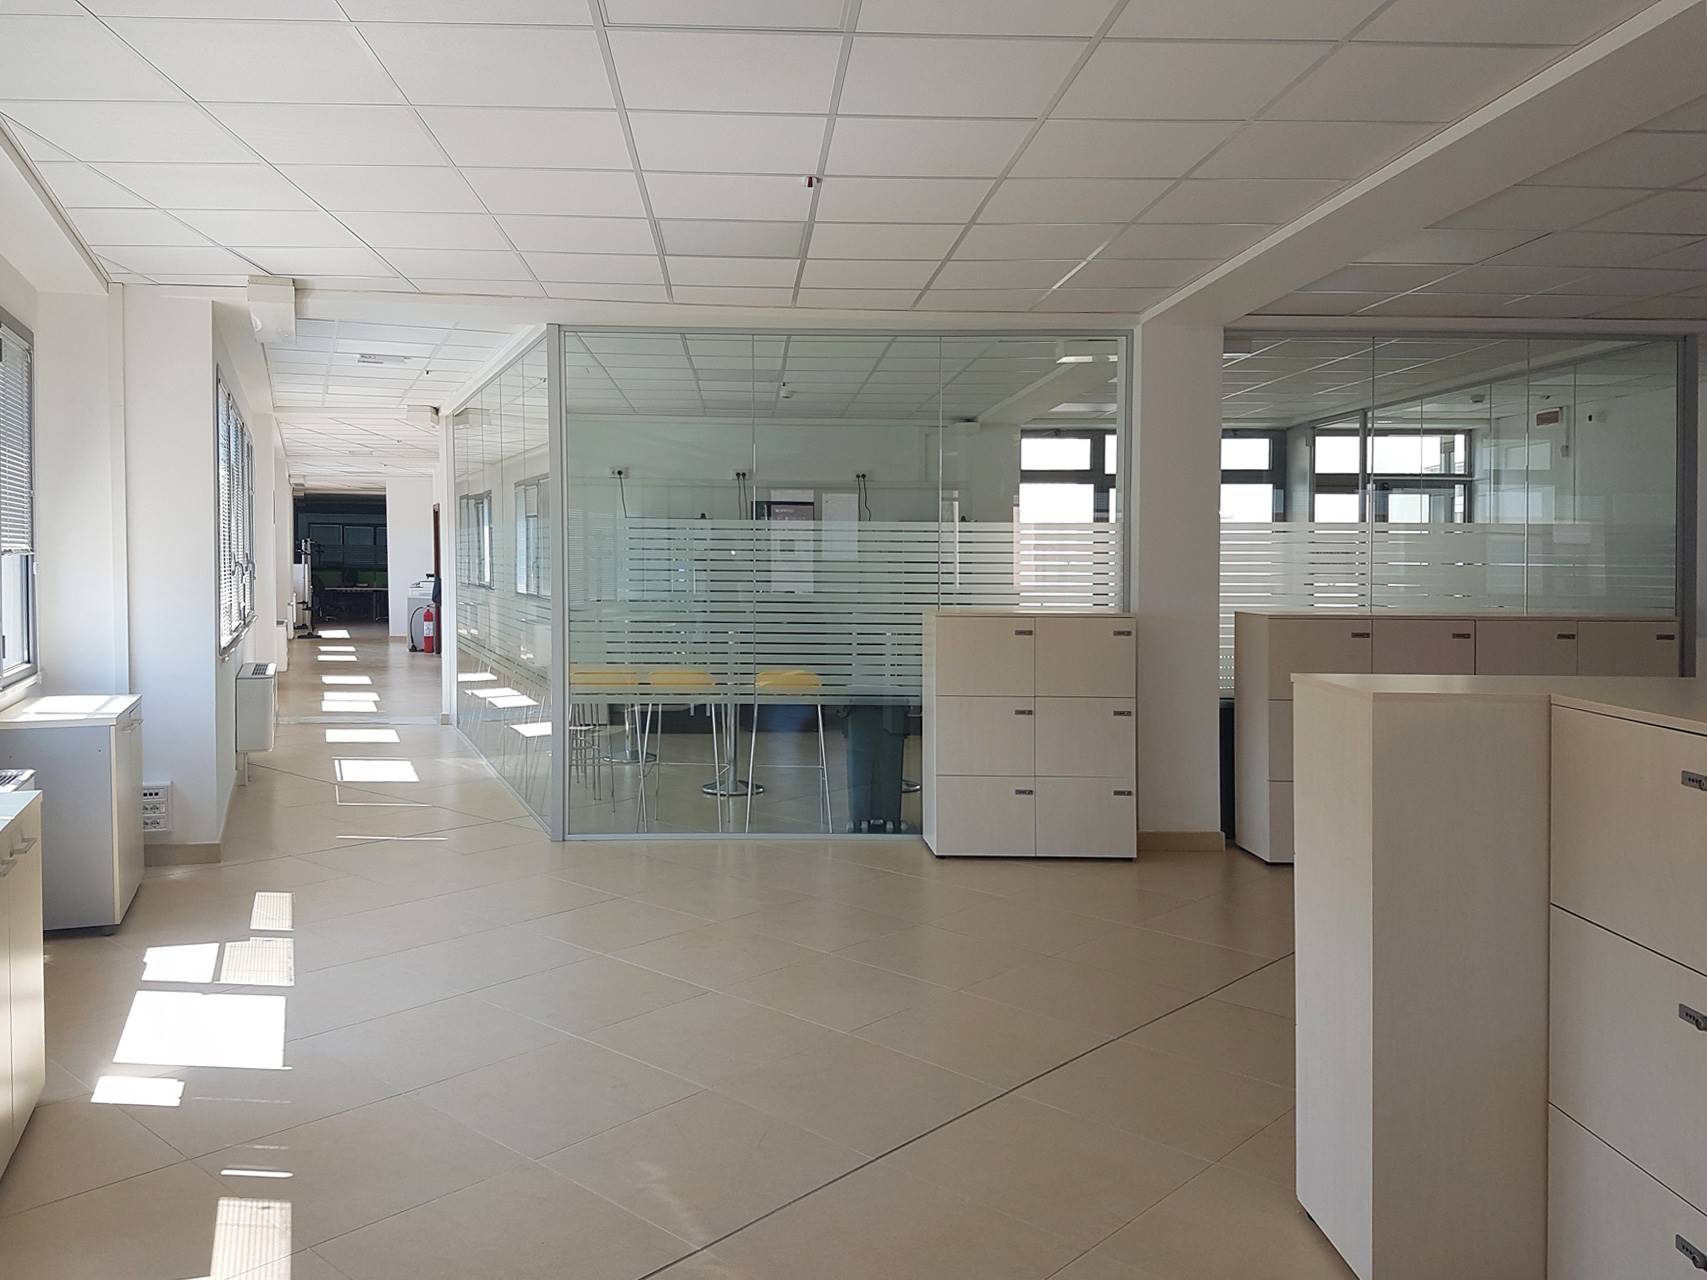 Modern, dynamic and well-windowed office of 840 sqm located in an easily accessible area on the second floor of a newly constructed building with 